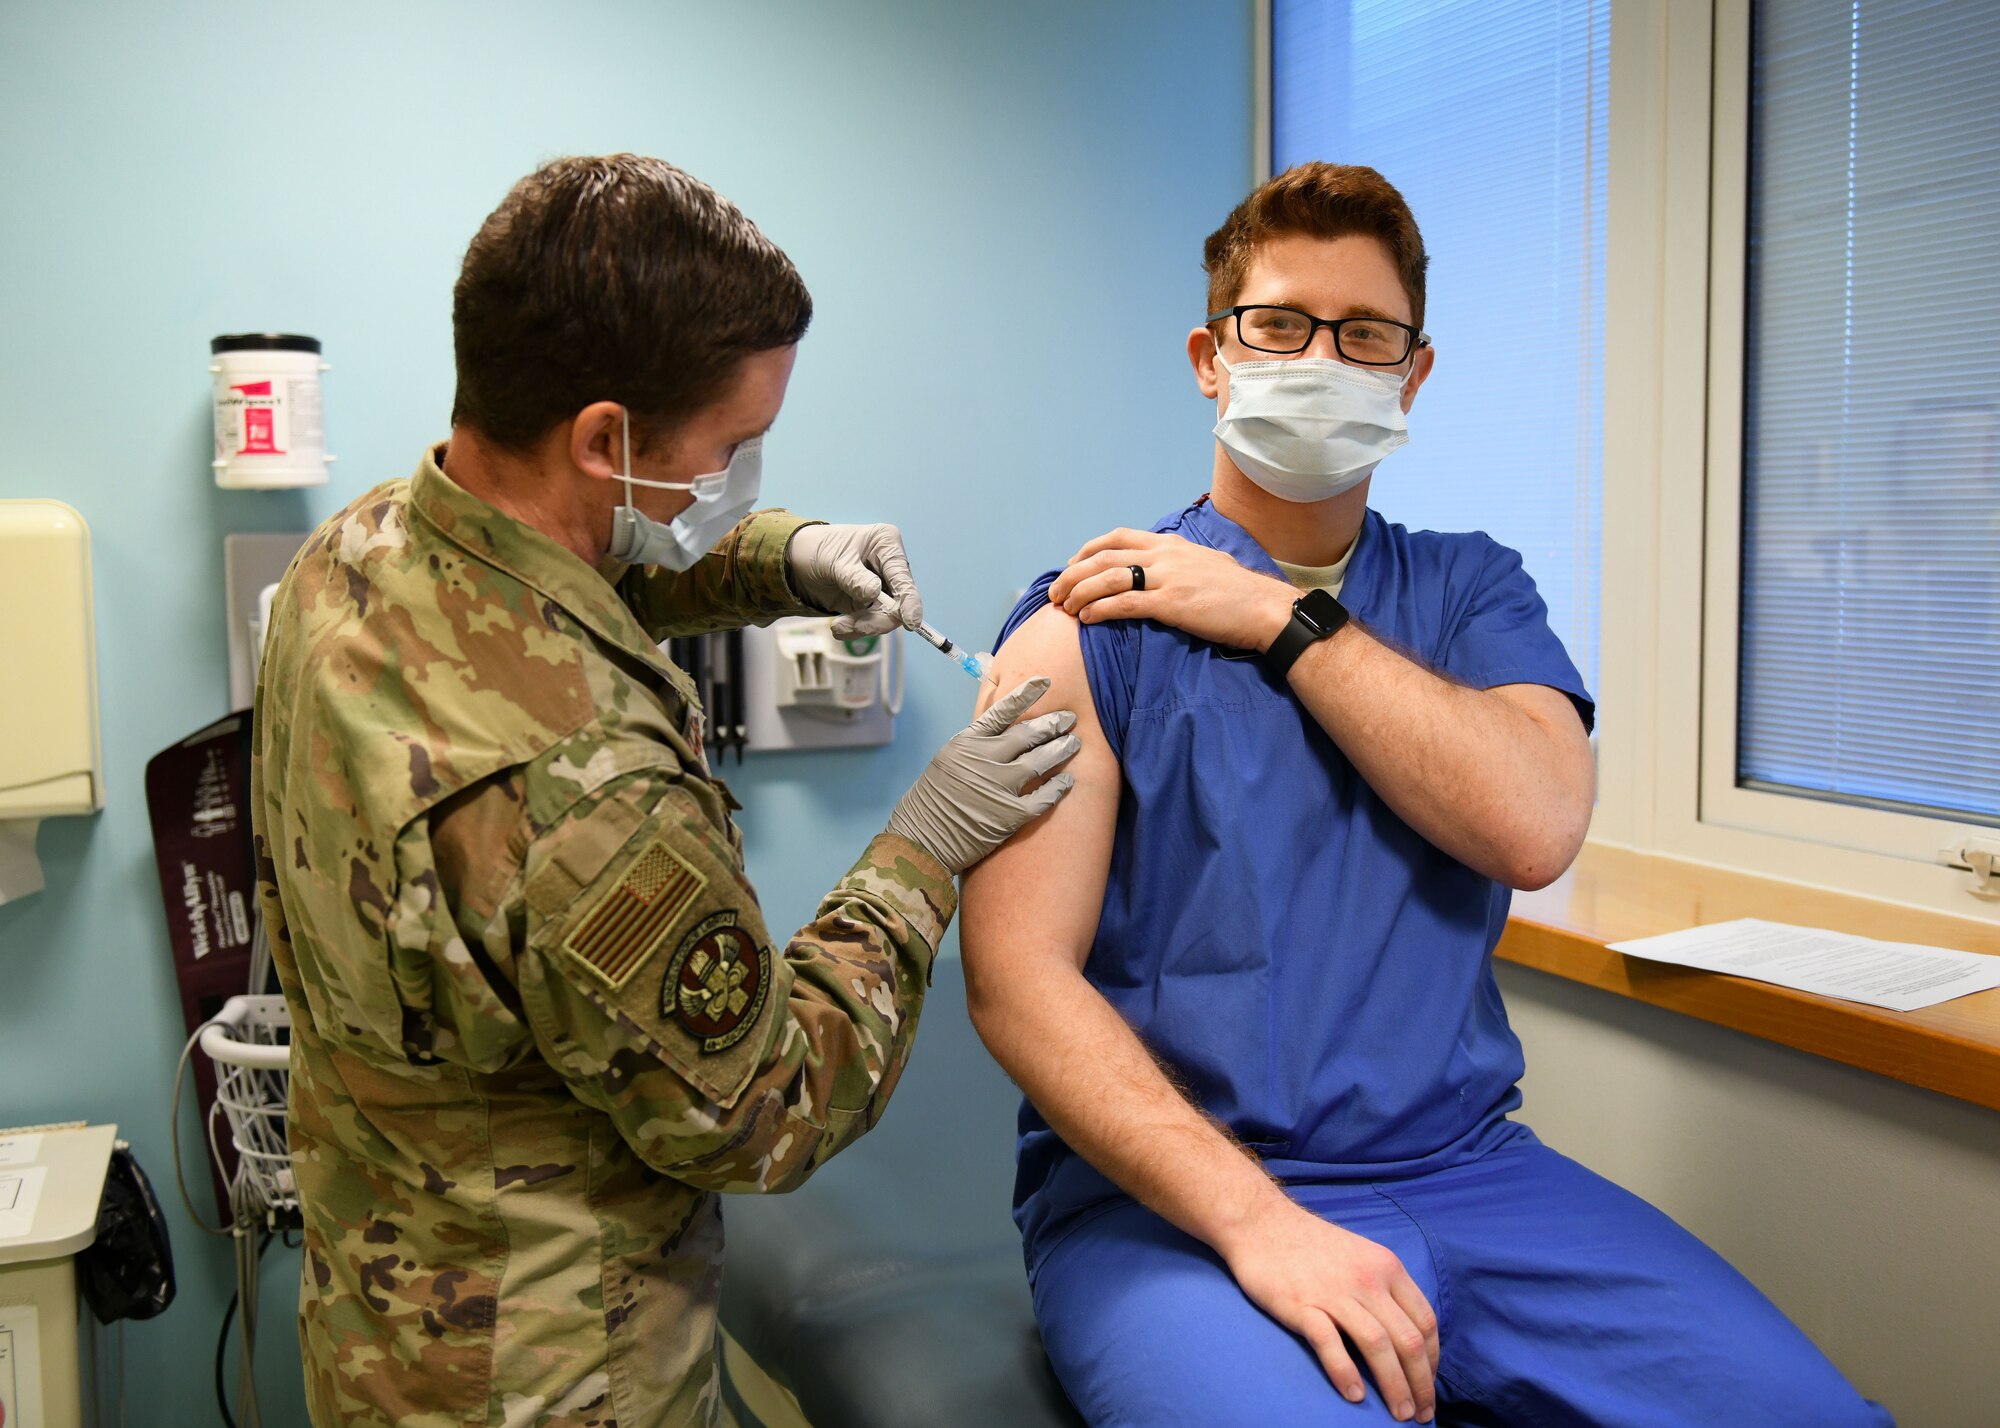 Airman 1st Class Connor Sams, 48th Medical Group technician, receives the COVID-19 vaccine at Royal Air Force Lakenheath, England, Dec.29, 2020. The arrival of the vaccine paves the way for a phased vaccine distribution plan to protect our communities against COVID-19. (U.S. Air Force photo by Senior Airman Madeline Herzog)